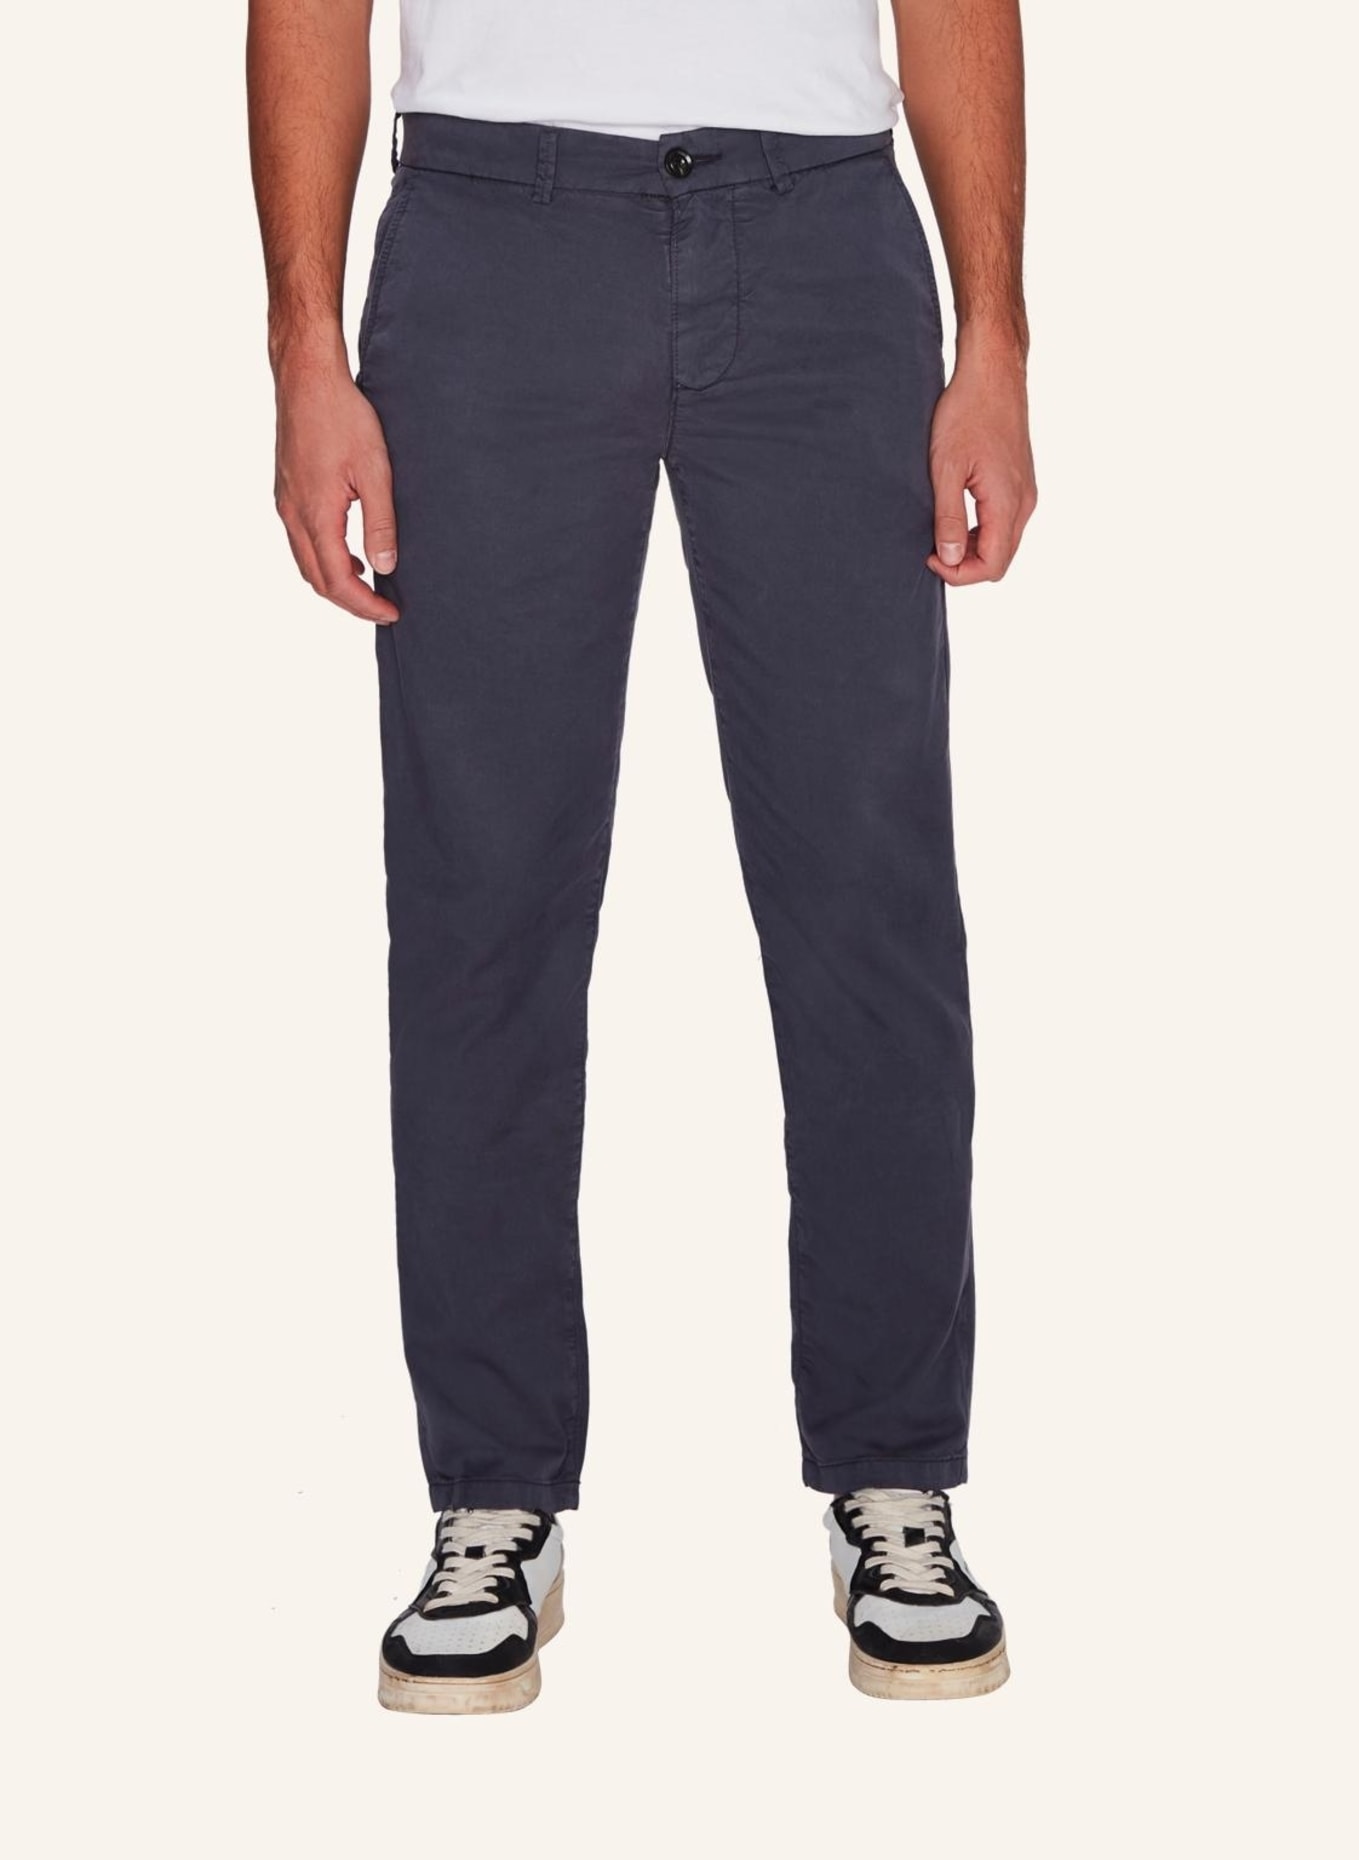 7 for all mankind SLIMMY CHINO TAPERED Pants, Farbe: BLAU (Bild 2)